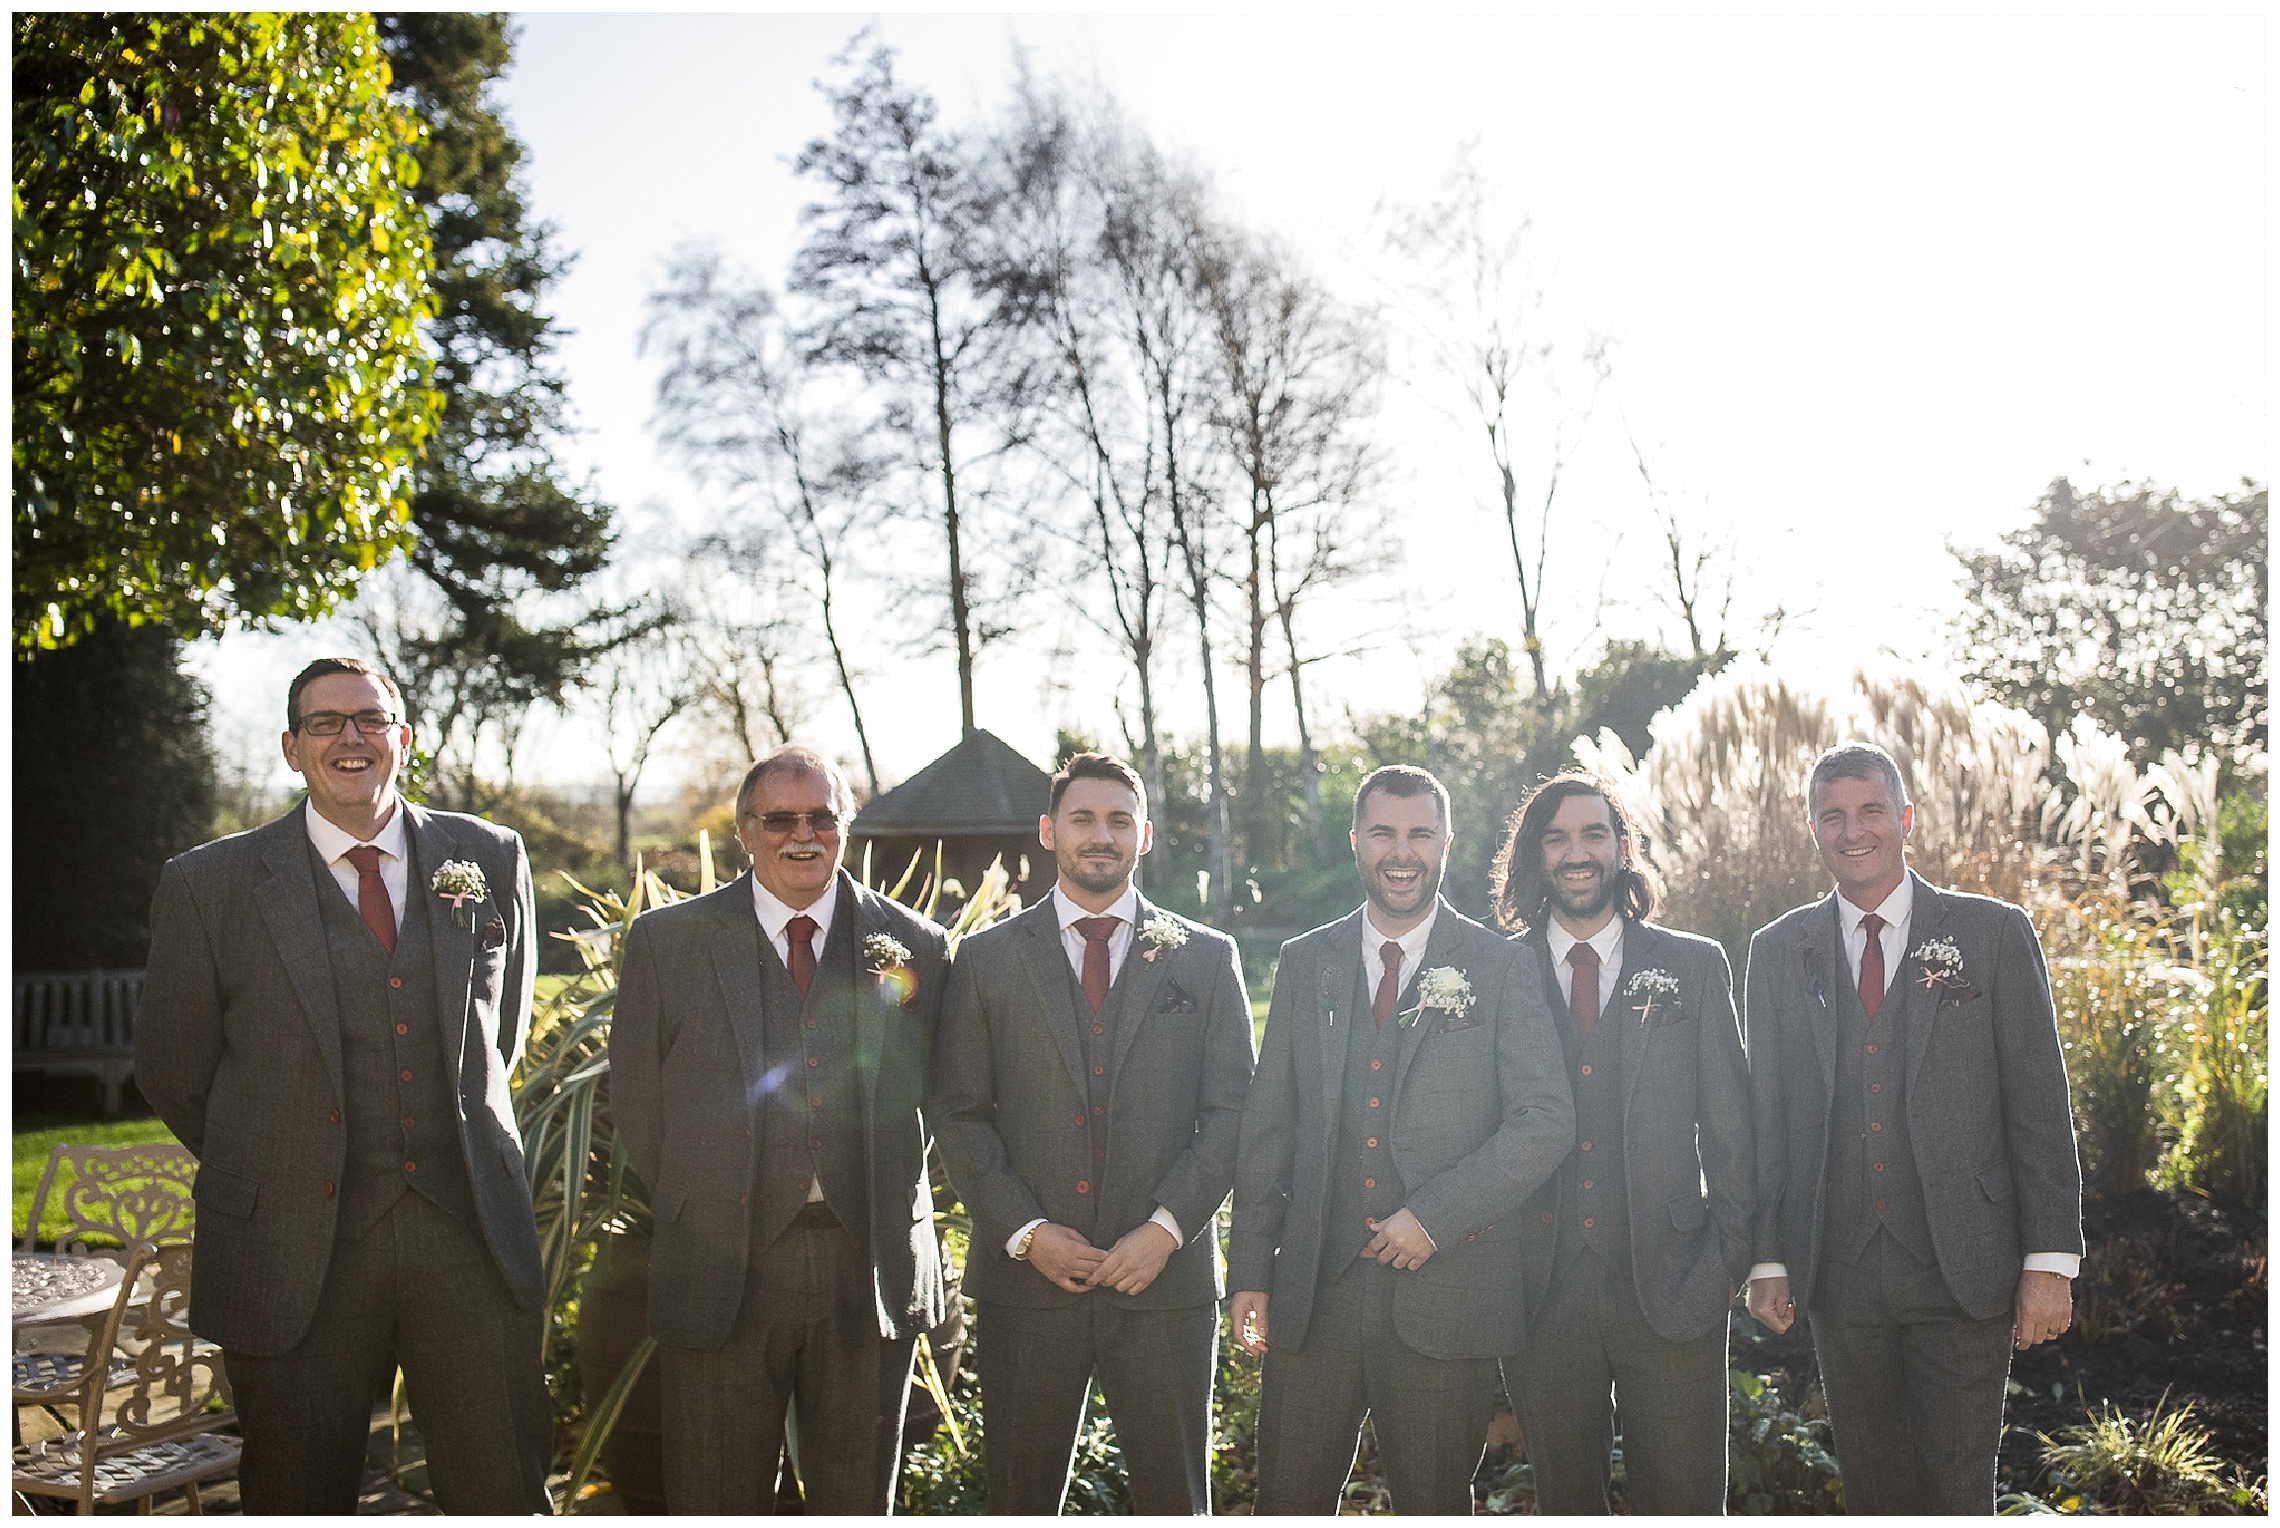 groomsmen standing outside in sun together smiling before ceremony